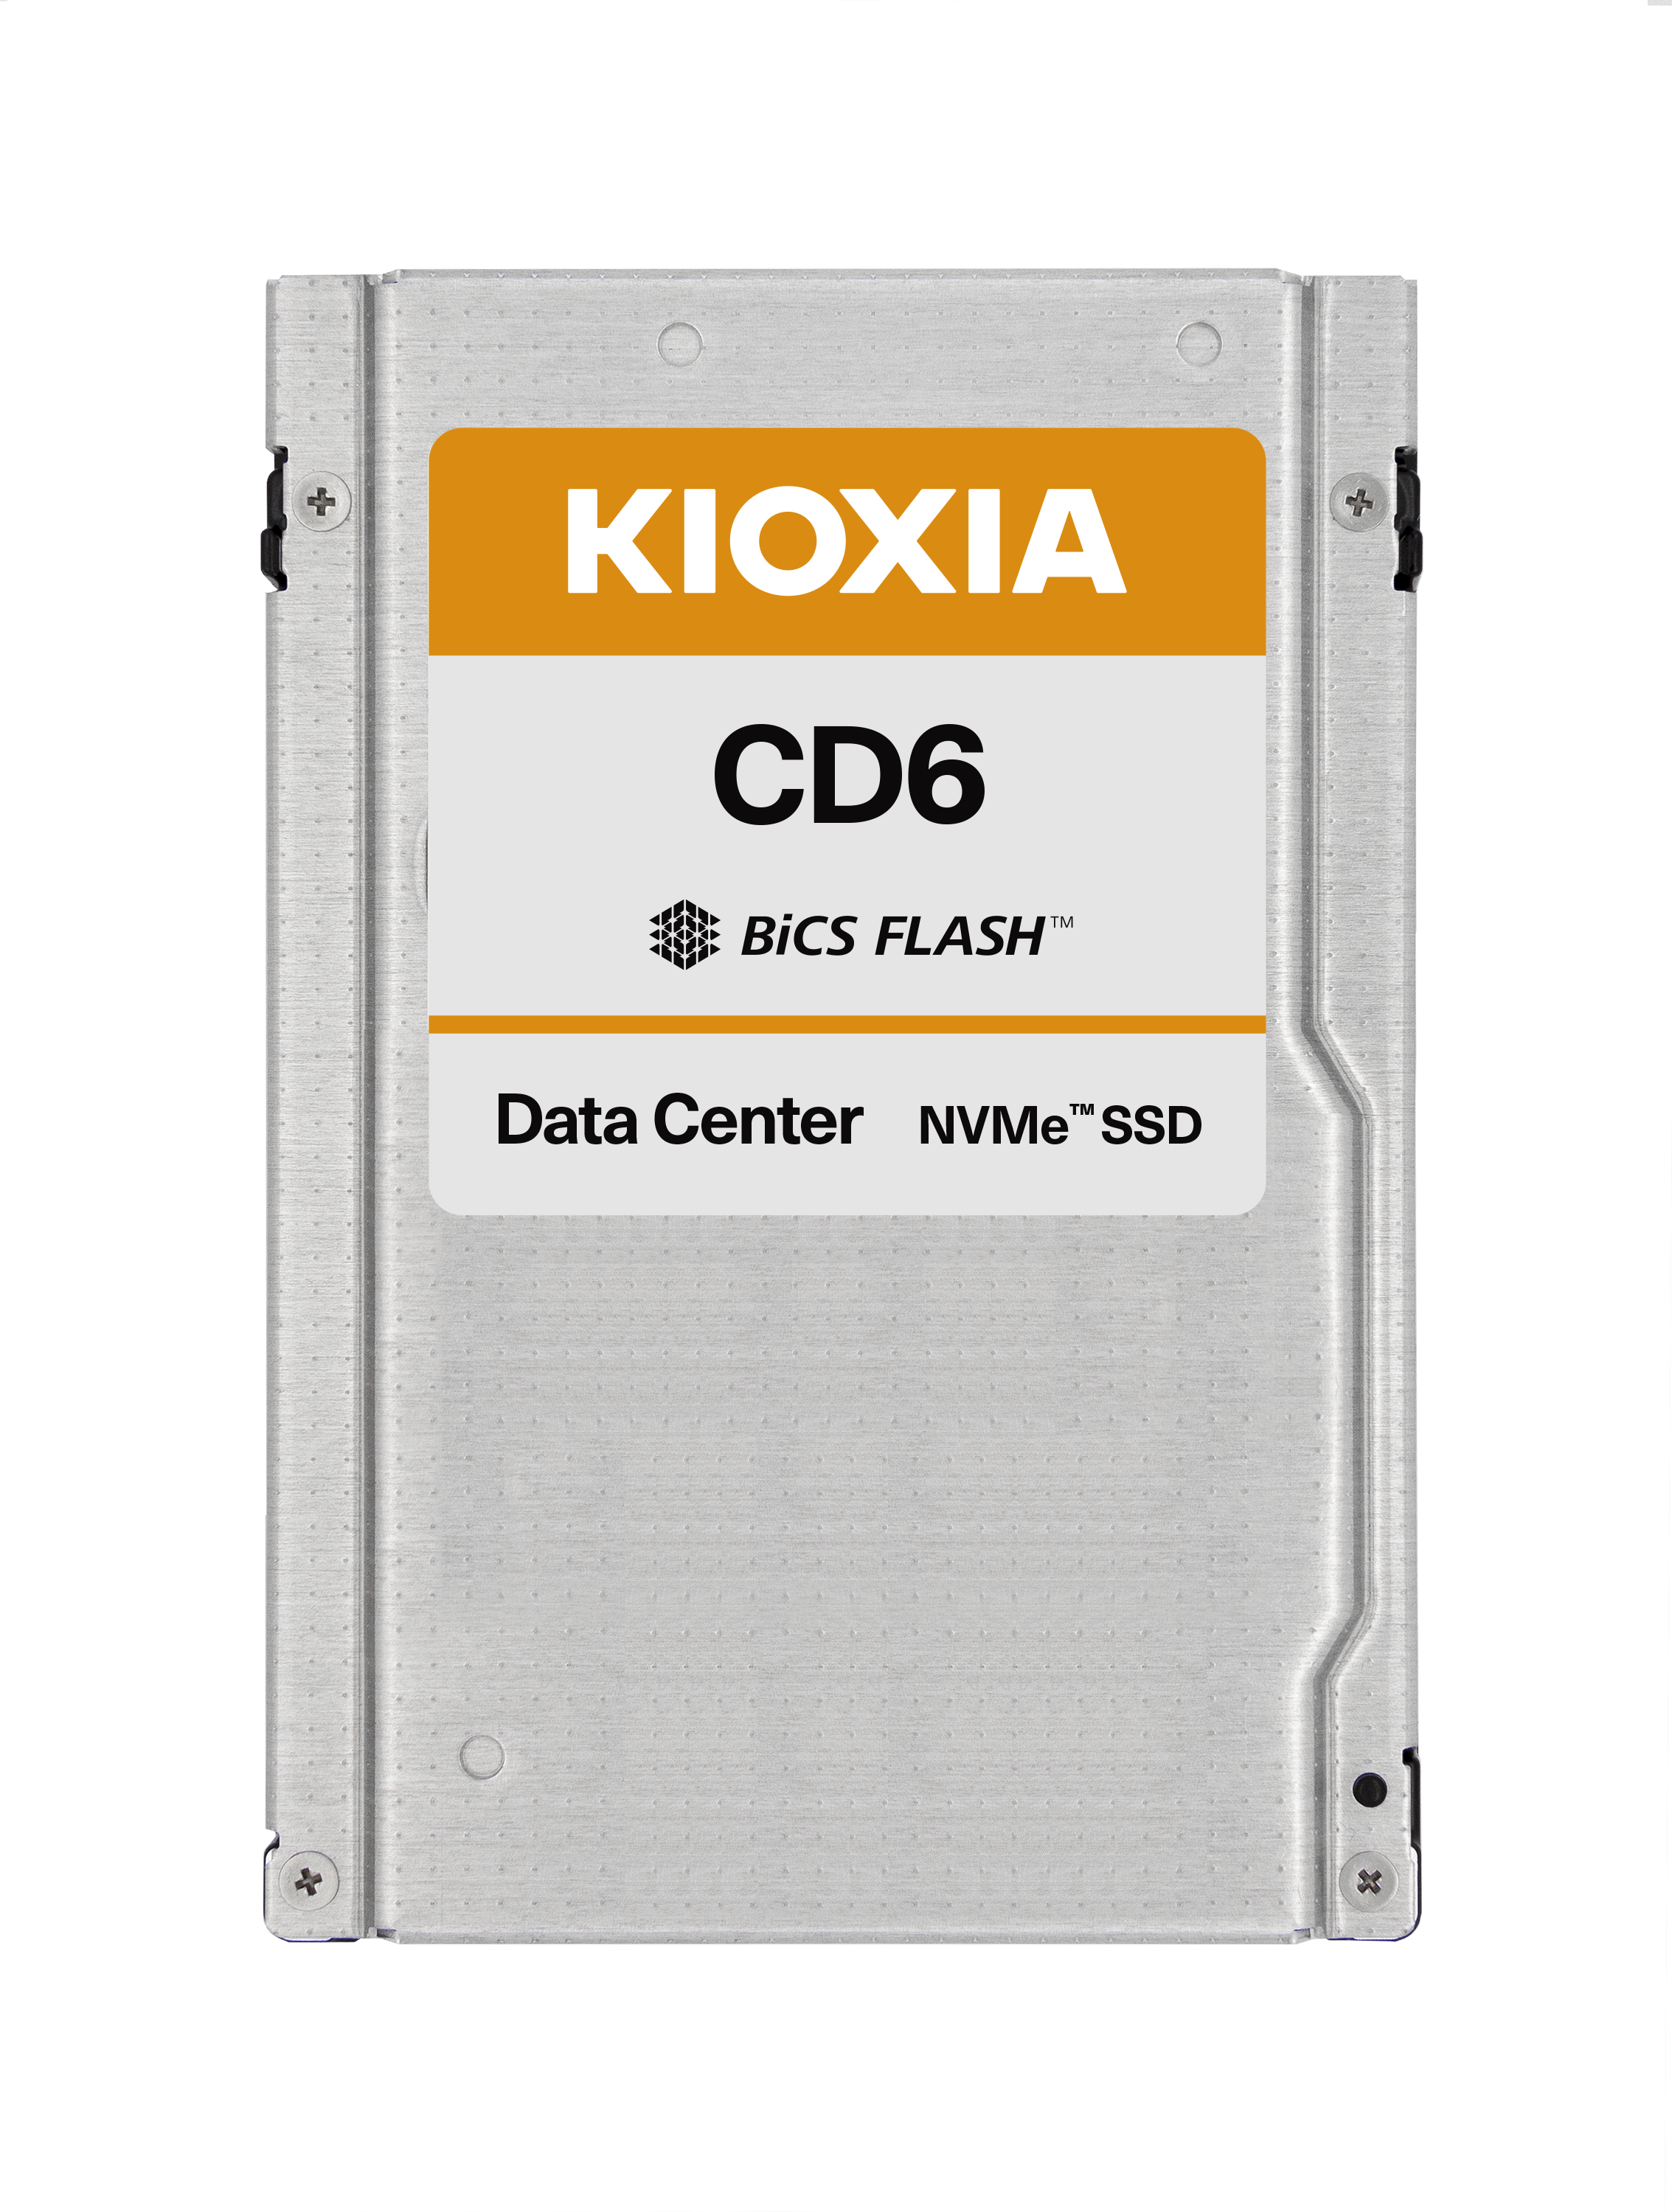 Kioxia CD6 KCD61VUL1T60 1.6TB PCIe Gen 4.0 x4 8GB/s 2.5" Mixed Use Solid State Drive